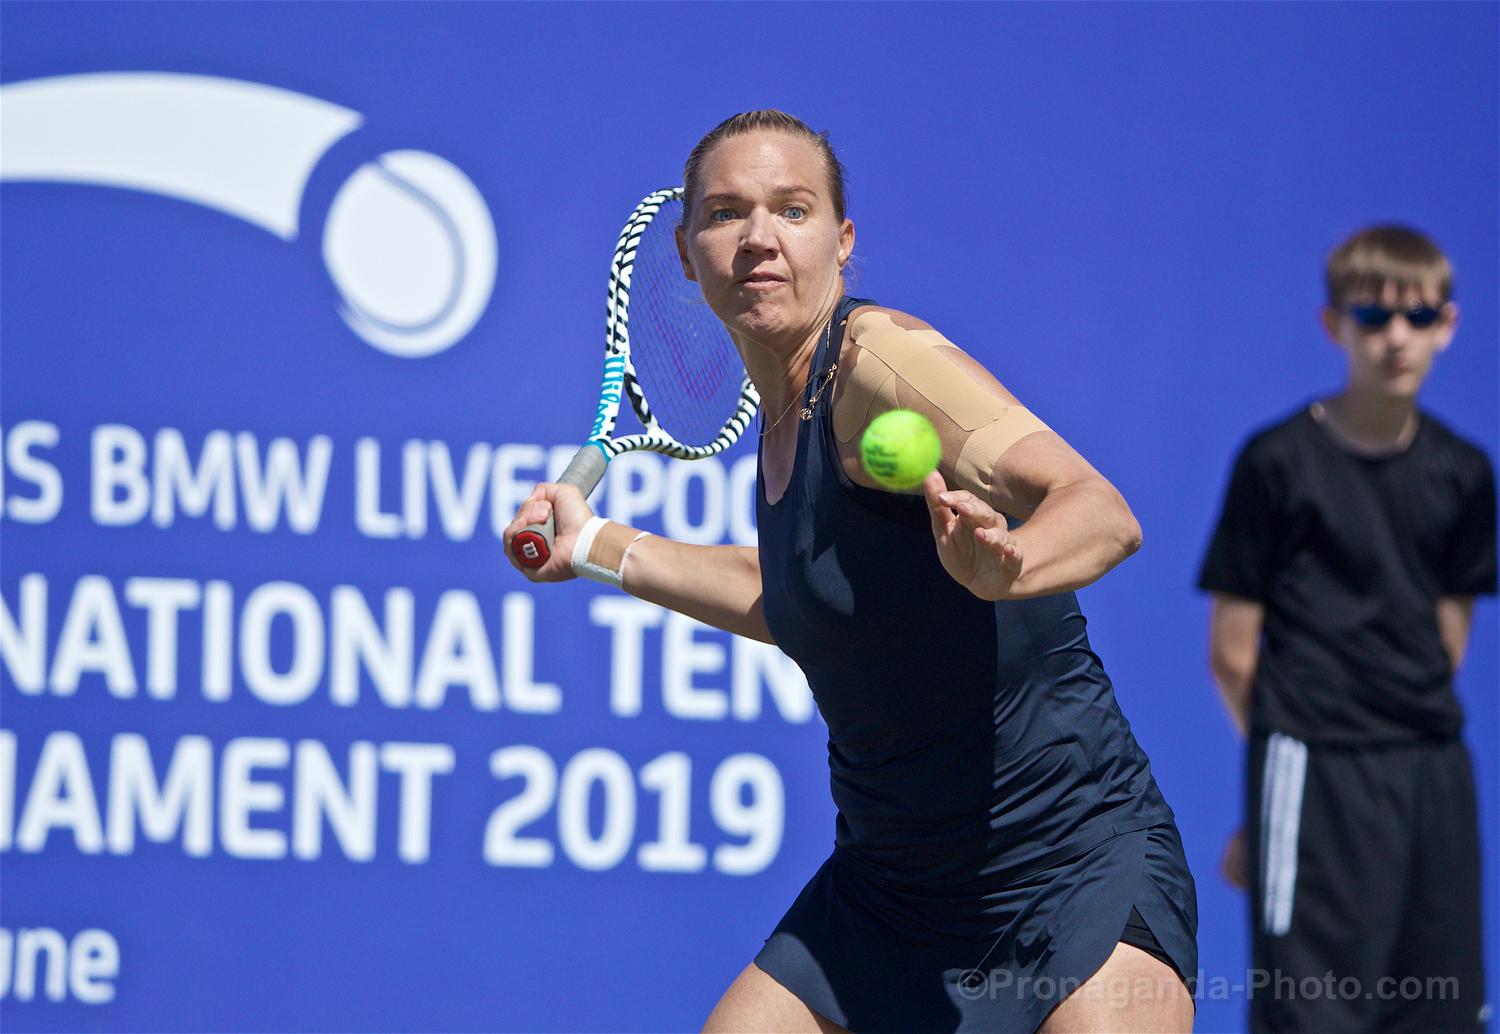 LIVERPOOL, ENGLAND - Thursday, June 20, 2019: Kaia Kanepi (EST) during the Liverpool International Tennis Tournament 2019 at the Liverpool Cricket Club. (Pic by David Rawcliffe/Propaganda)